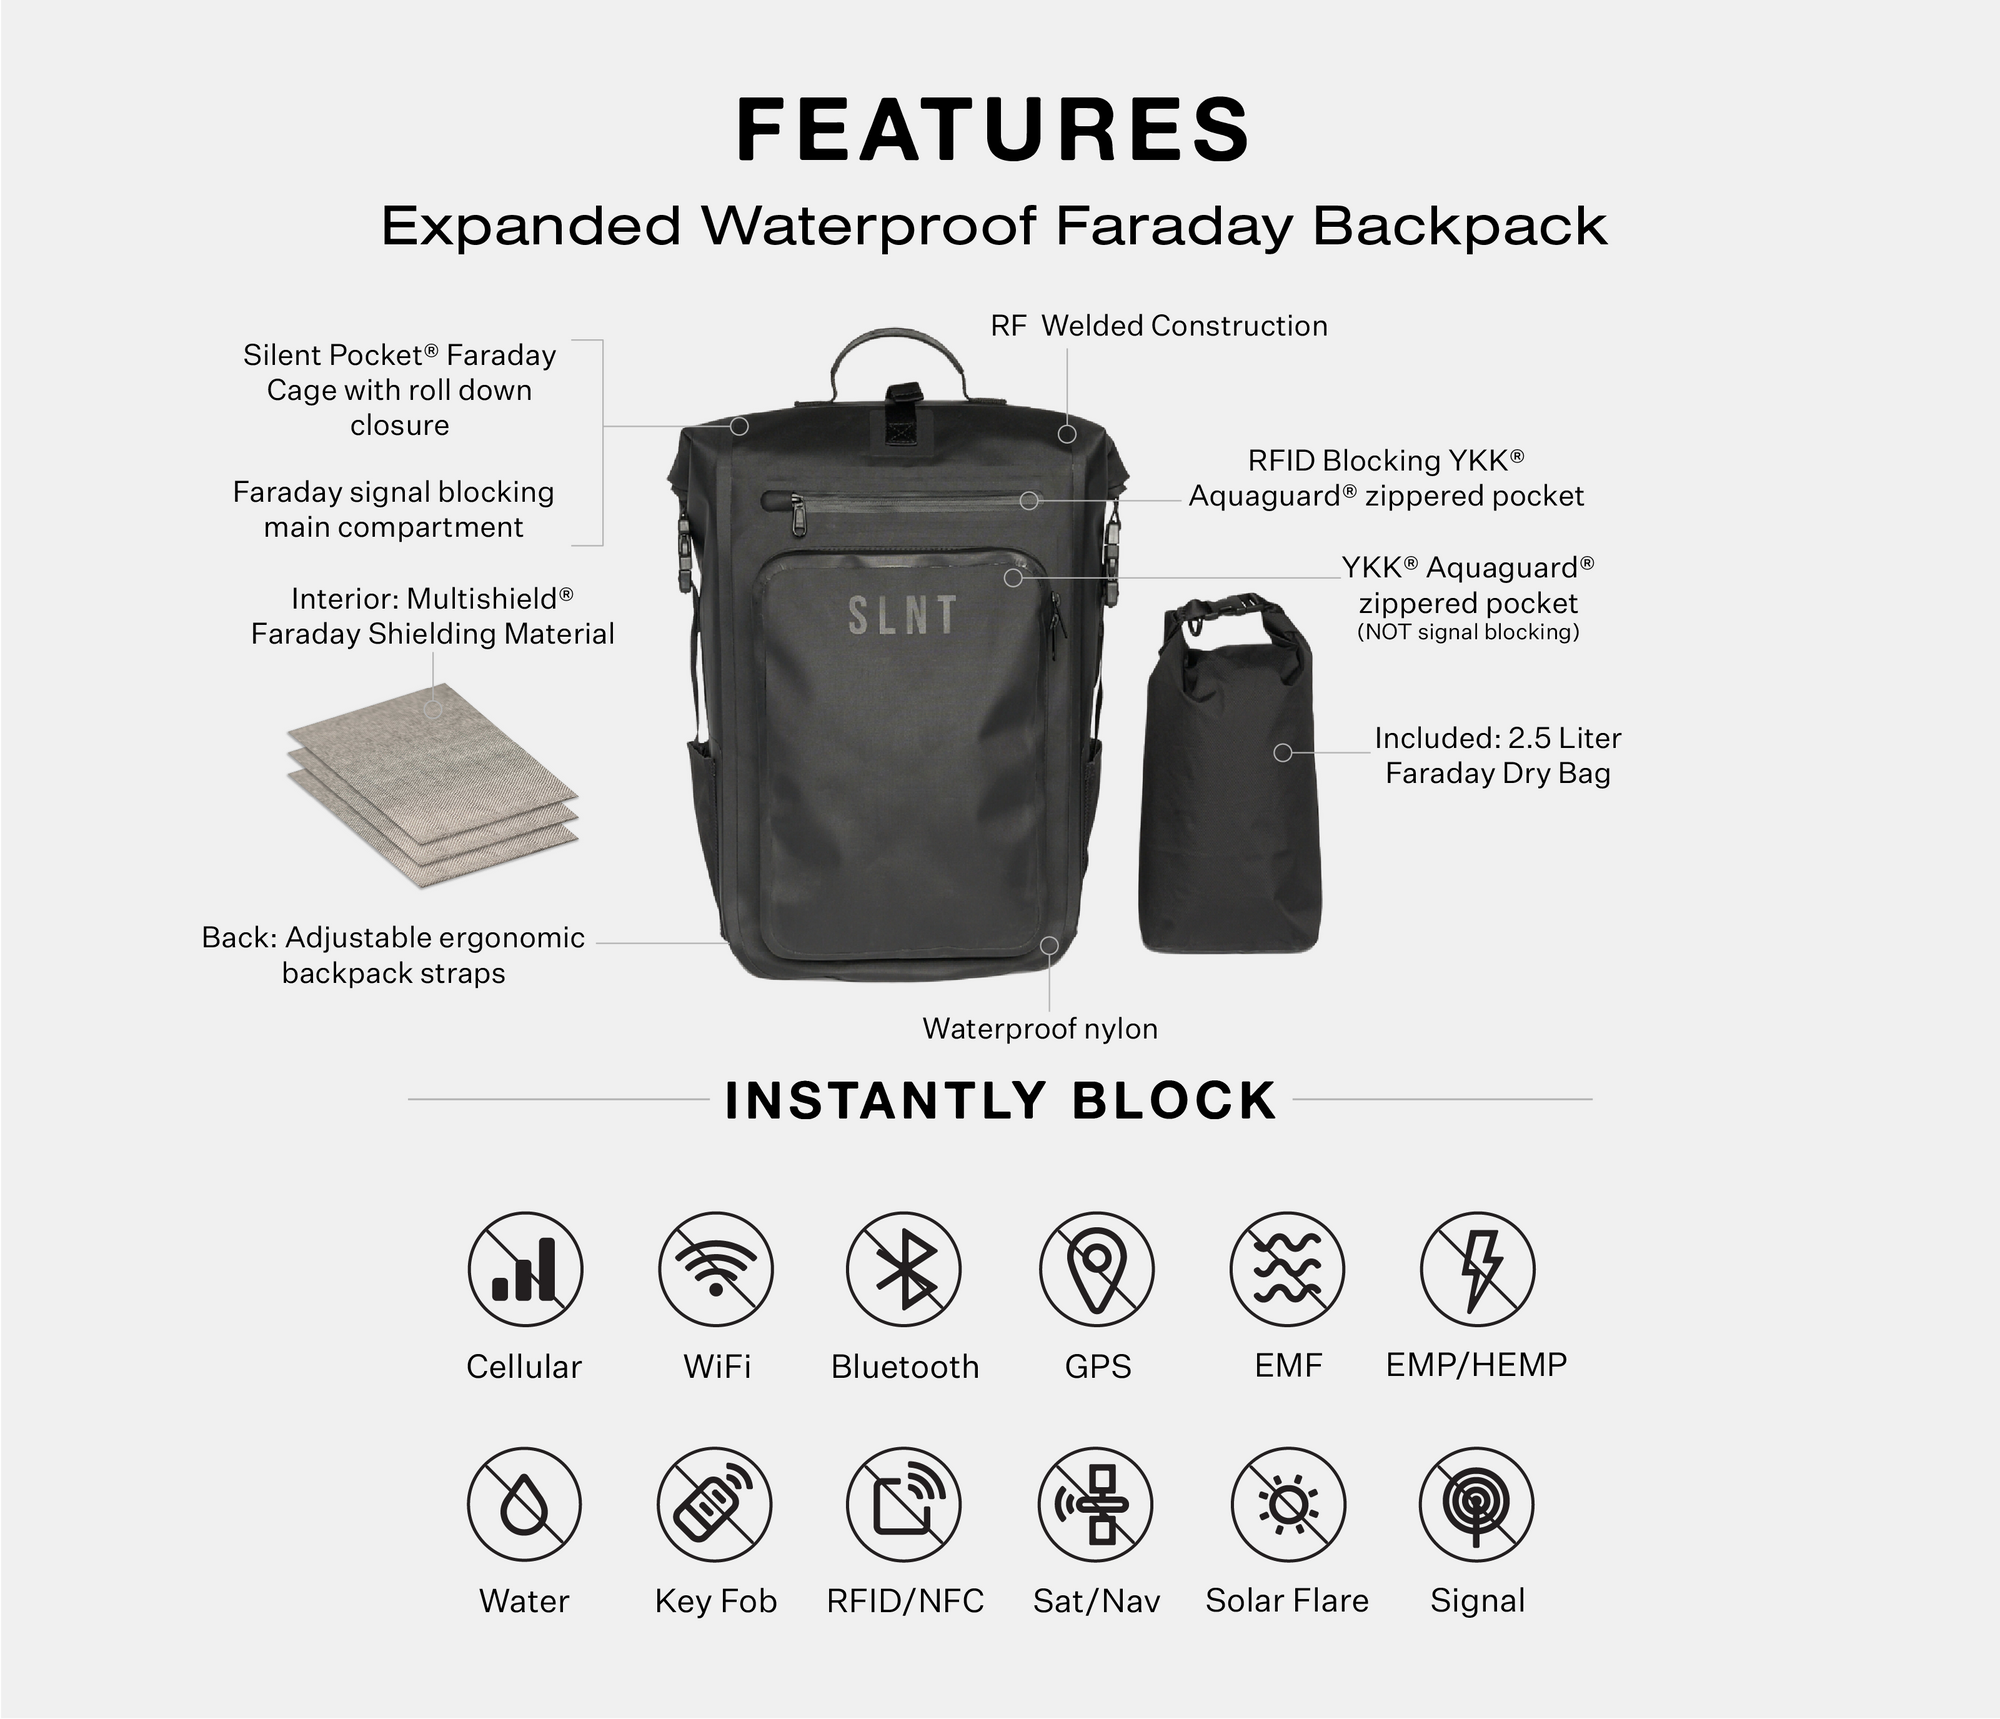 See How To Use Waterproof Faraday Backpack - SLNT®